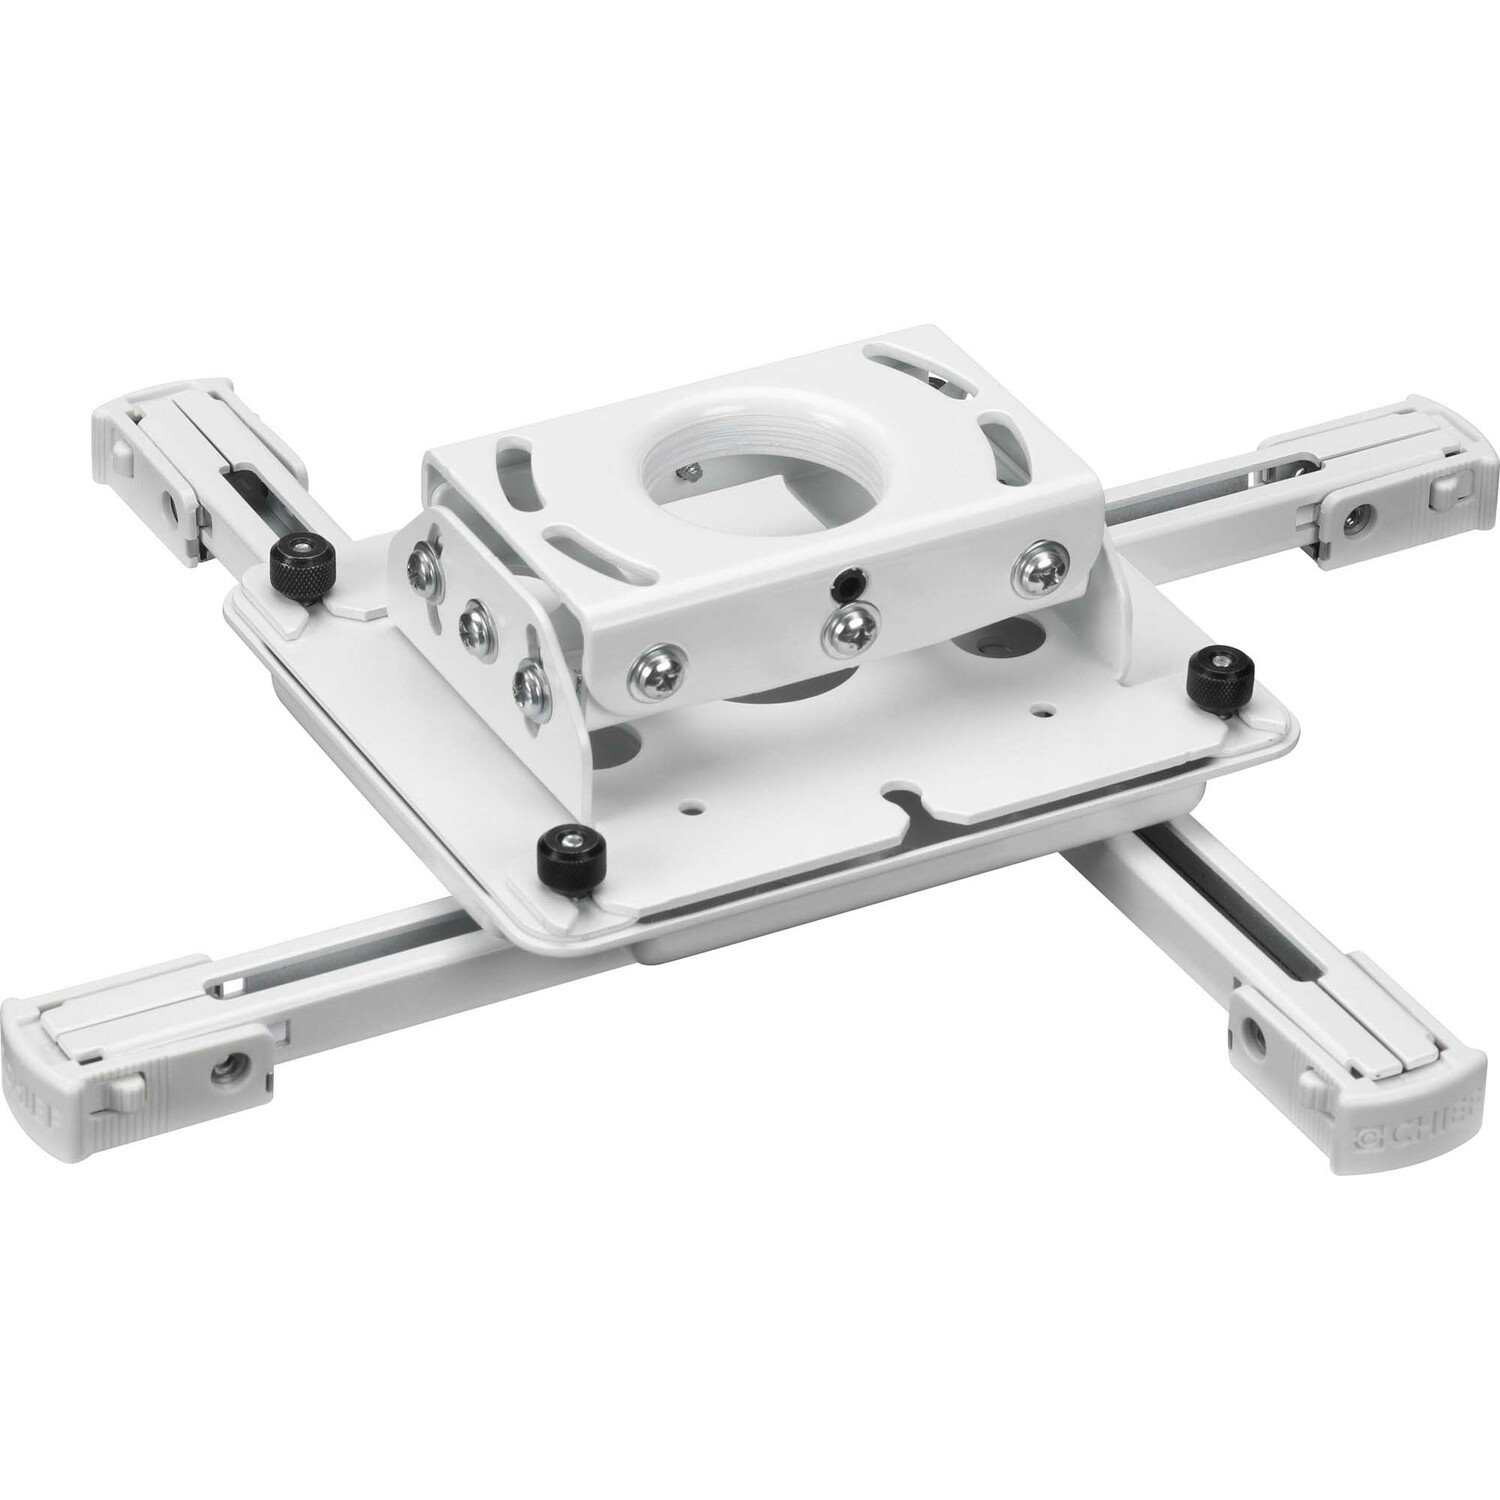 Chief Universal Projector Ceiling Mount - 2nd Generation - White